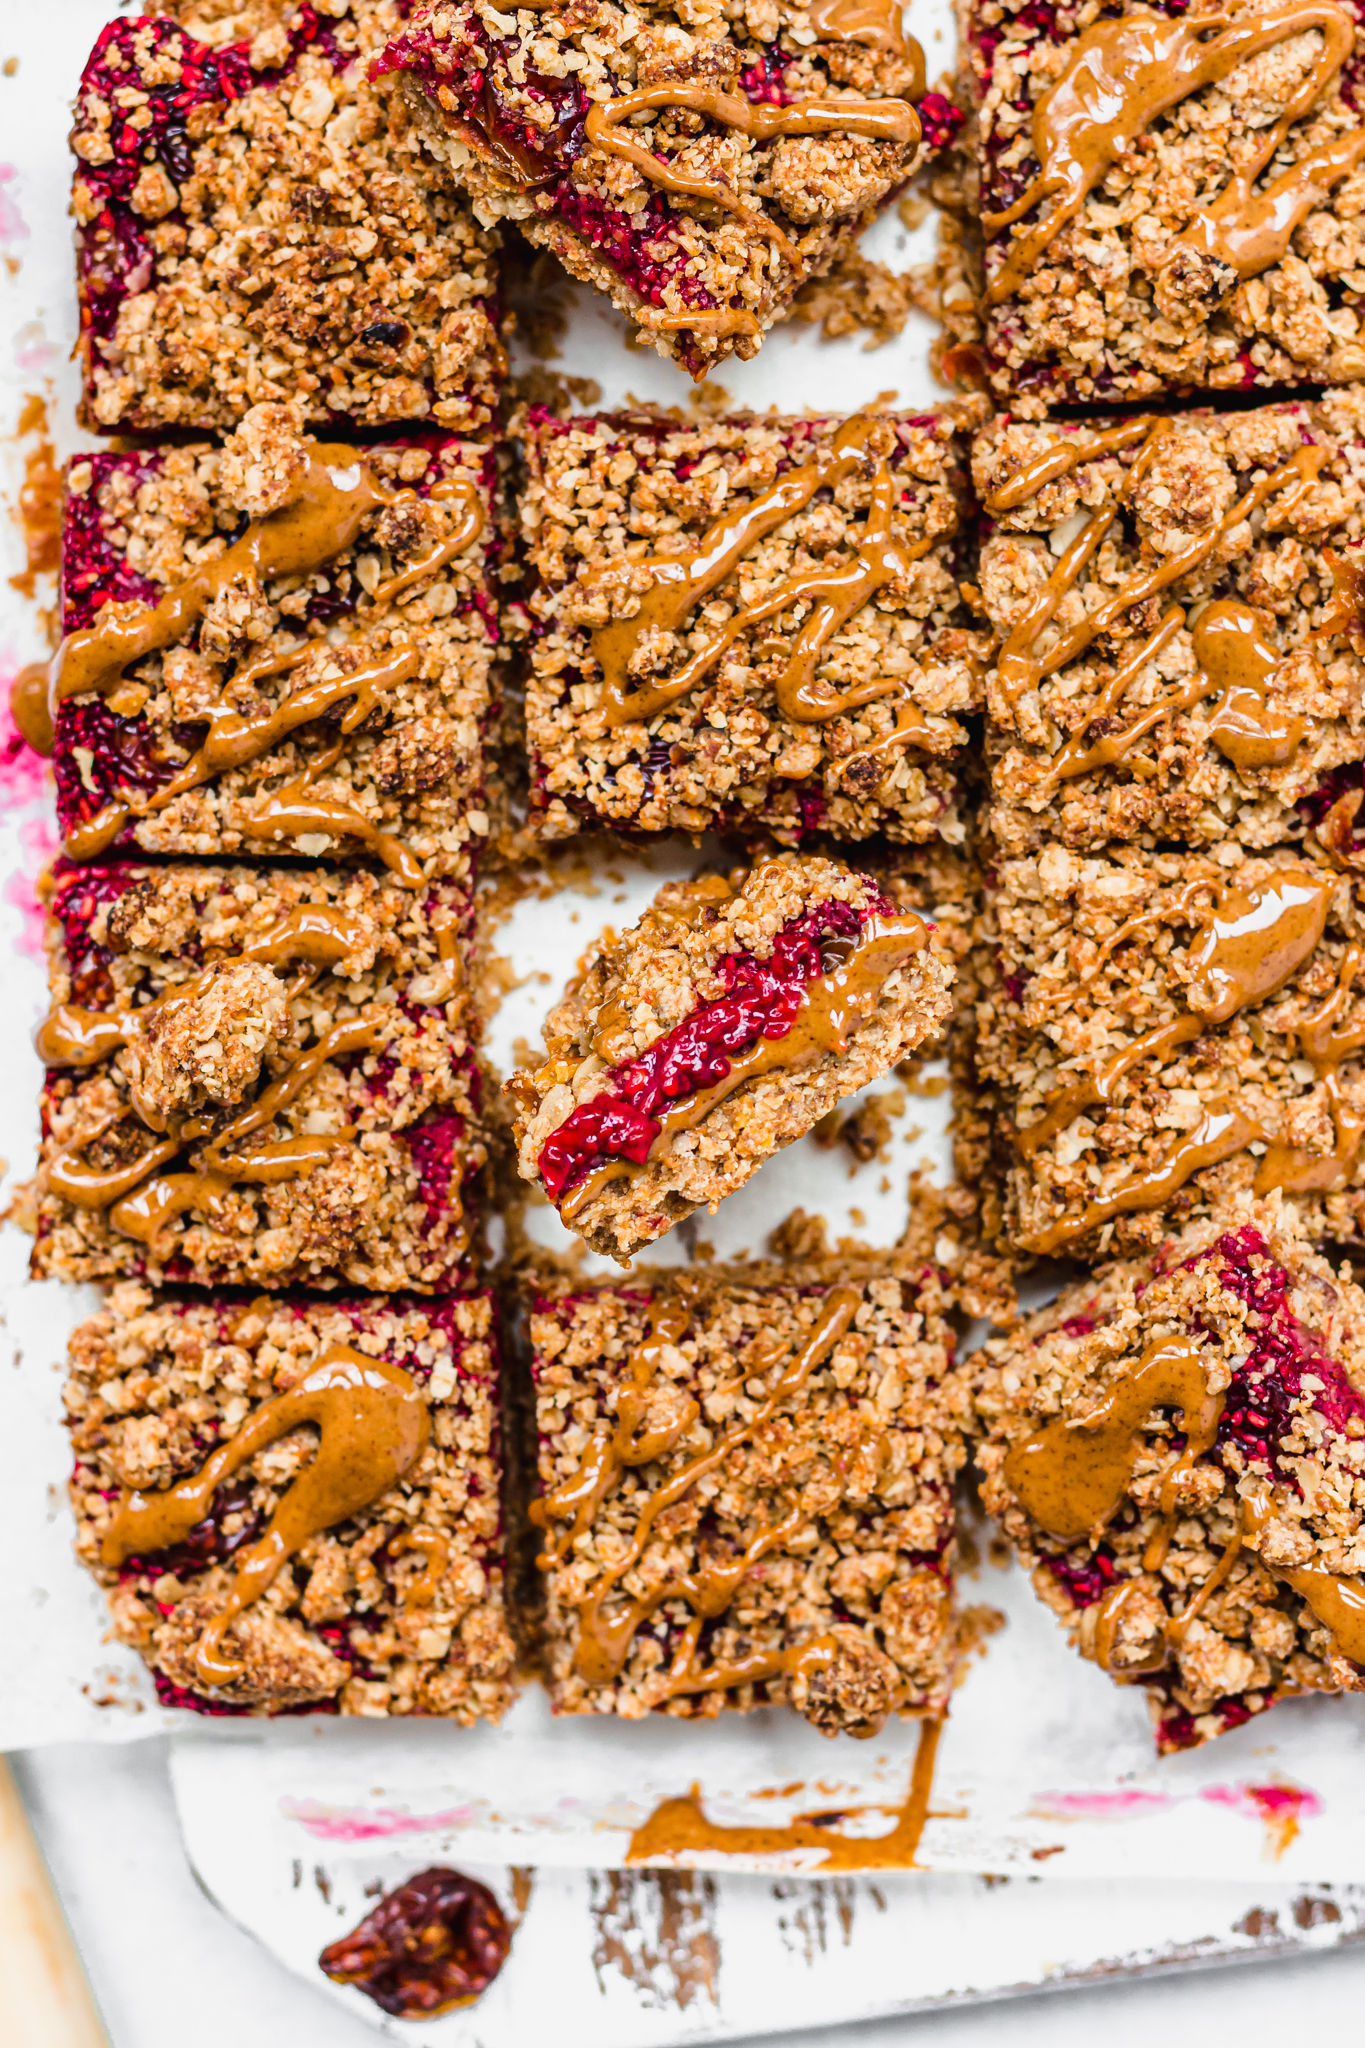 Almond Butter and Raspberry Crumble Bars